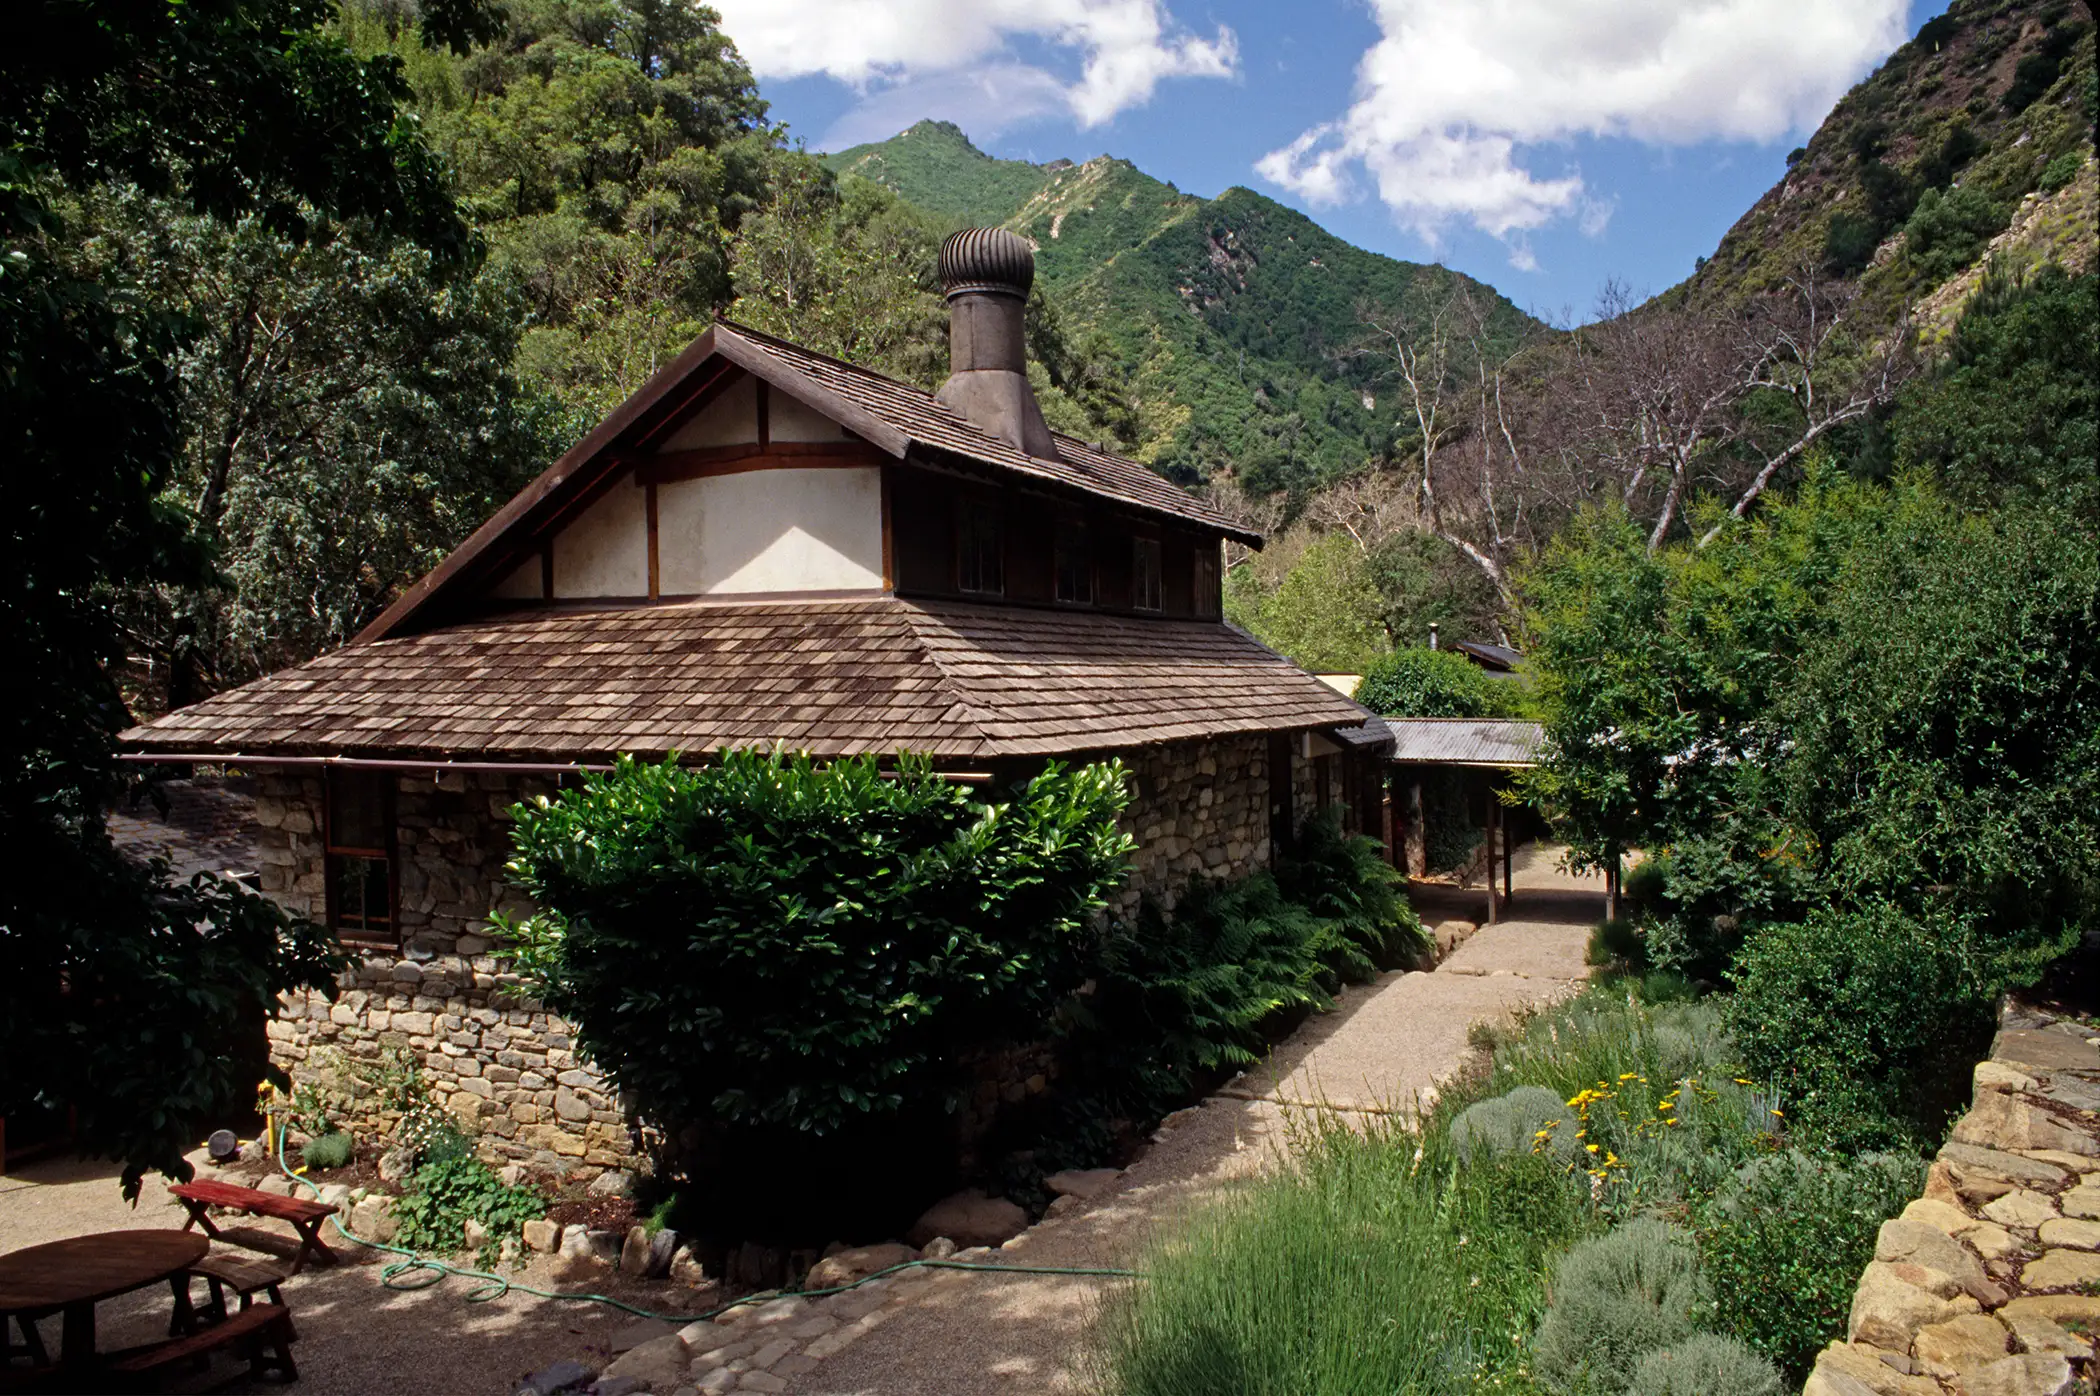 5. Tassajara, California:  The median household income in this community about 40  miles east of San Francisco is $135,672, but if residents get stressed out from earning all that money, they can relax in hot spring pool at a Zen Buddhist retreat nestled deep in the Carmel Valley.